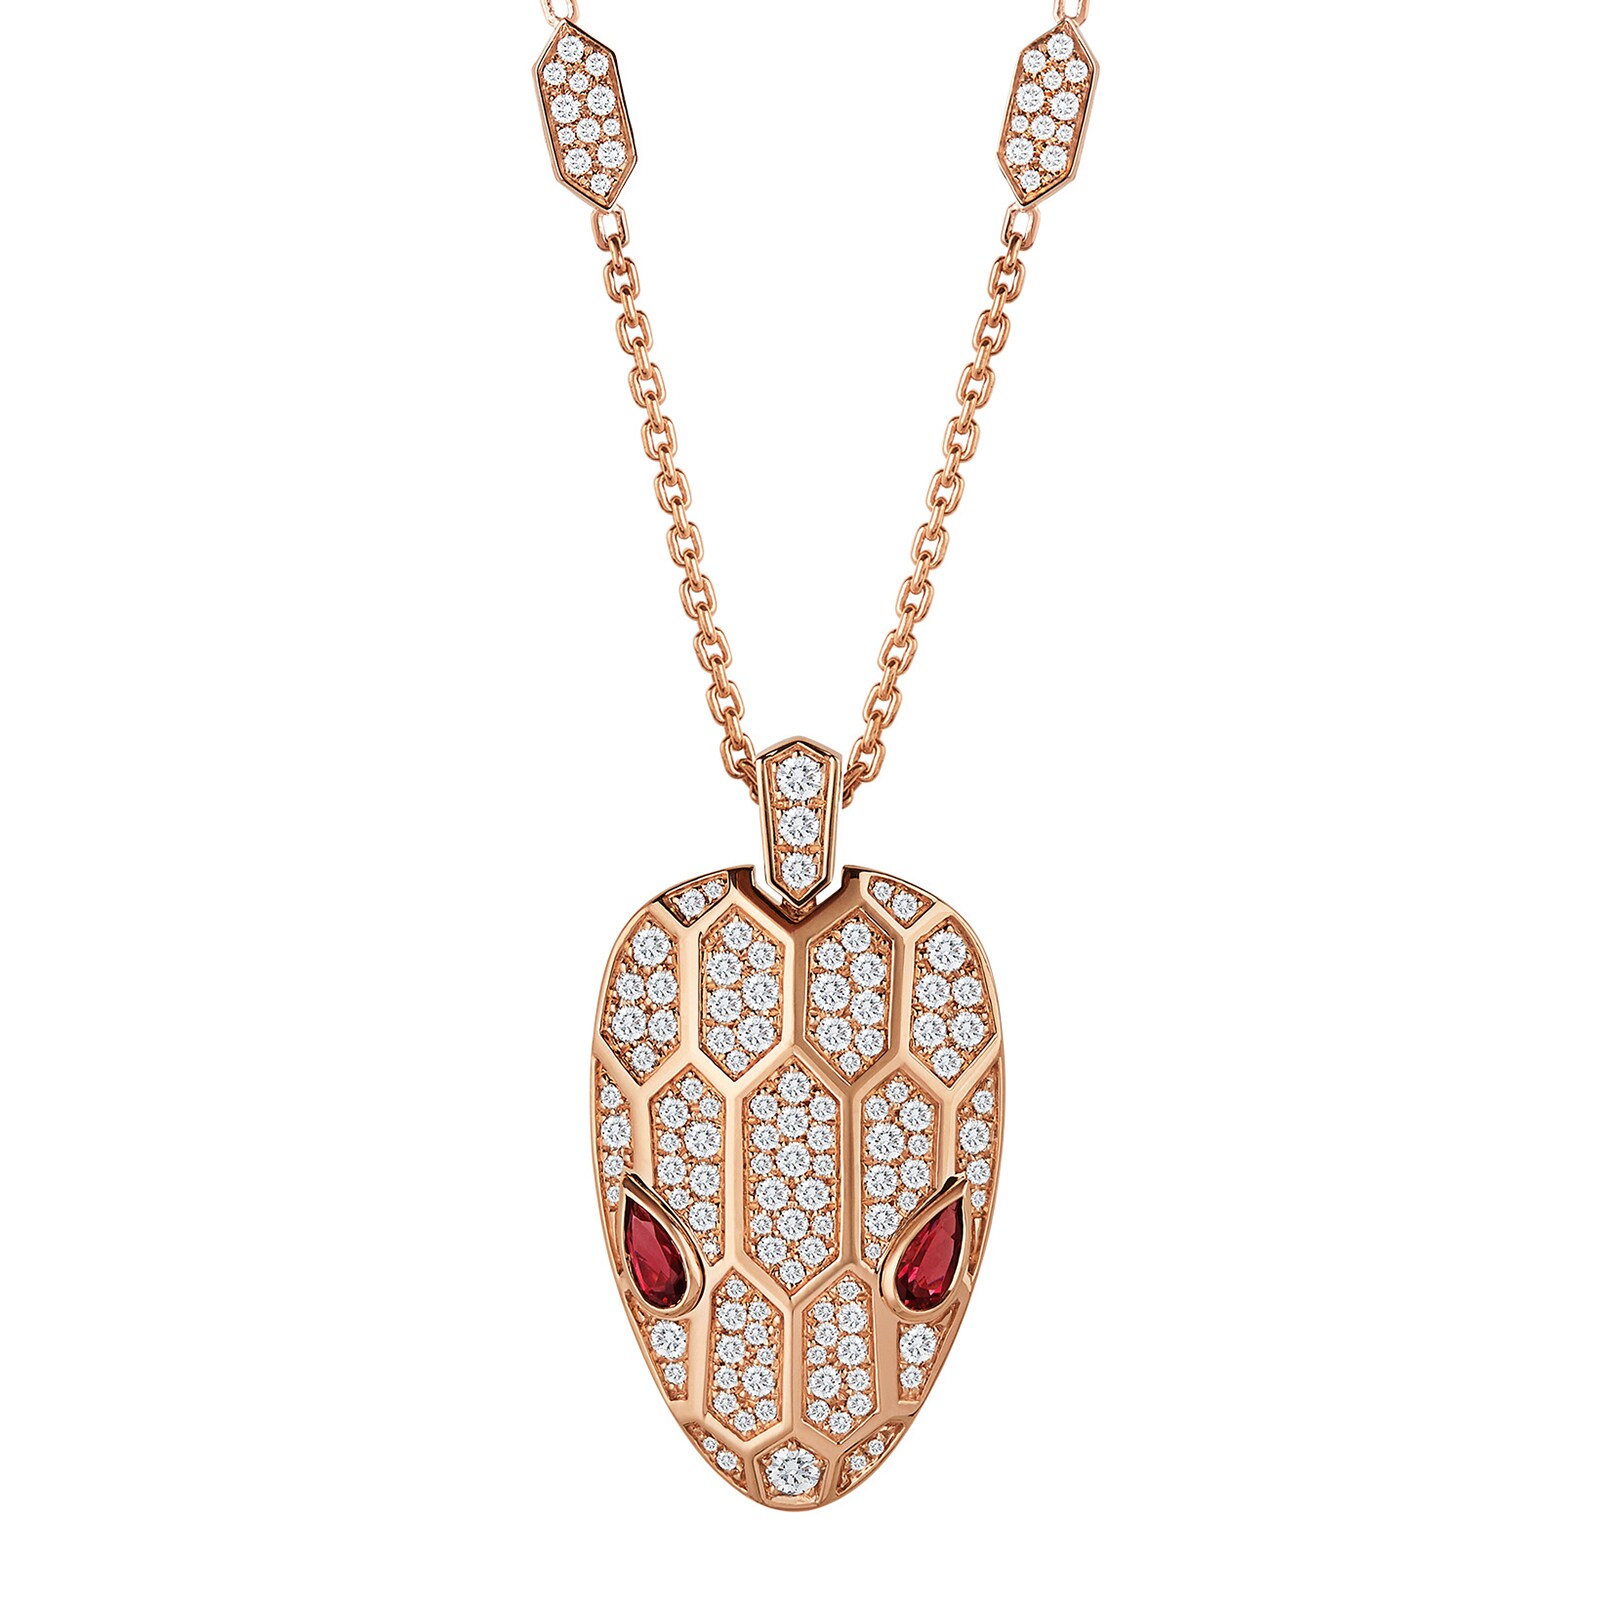 The Bulgari Serpenti necklace featuring a diamond encrusted serpent  encircling a single aquamarine. For more charming pieces, visit  http://balharbourshops.com… | งู